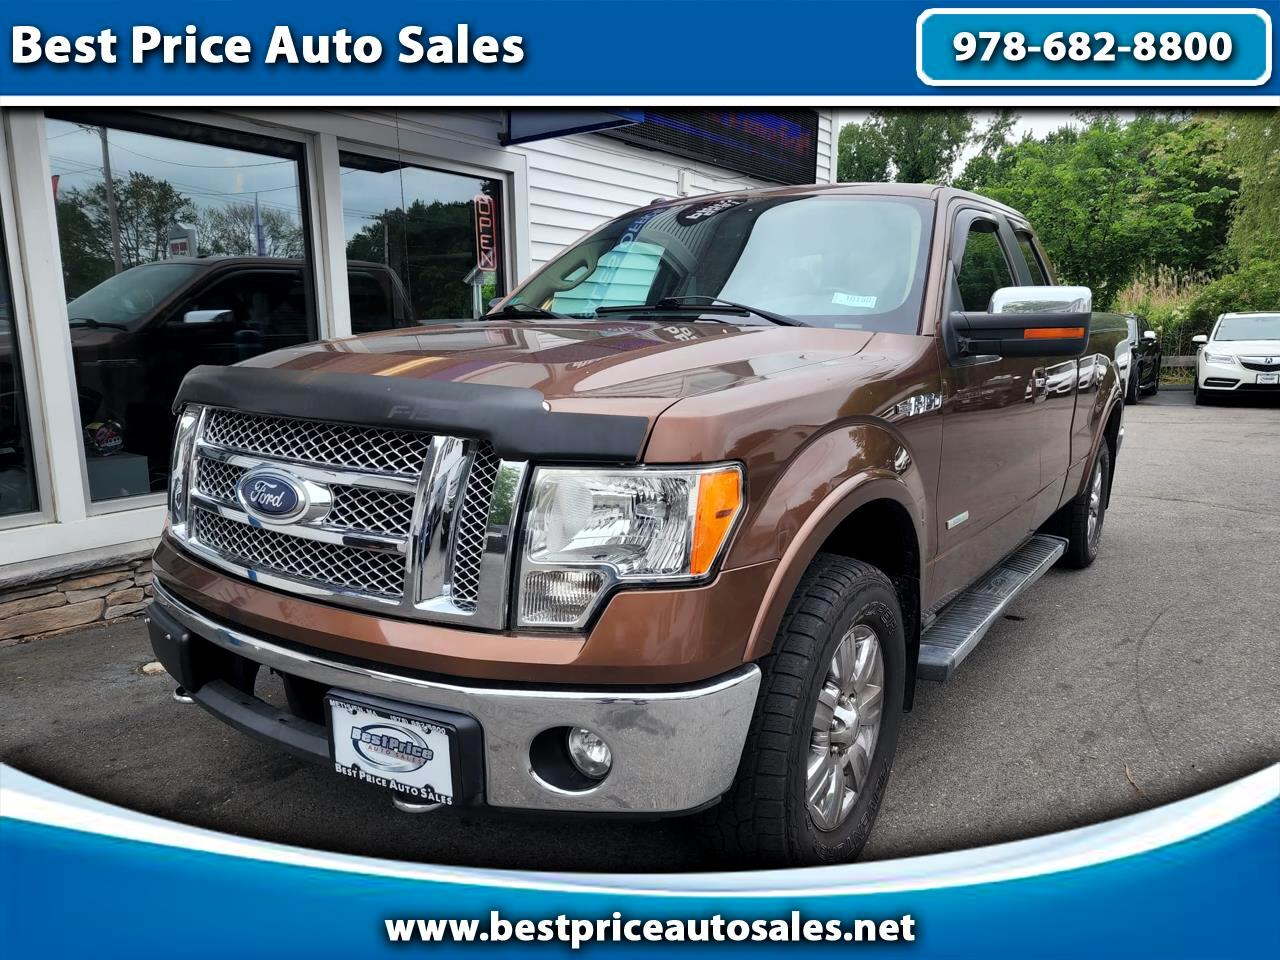 2011 Ford F-150 extended cab lariat Ecoboost 4WD